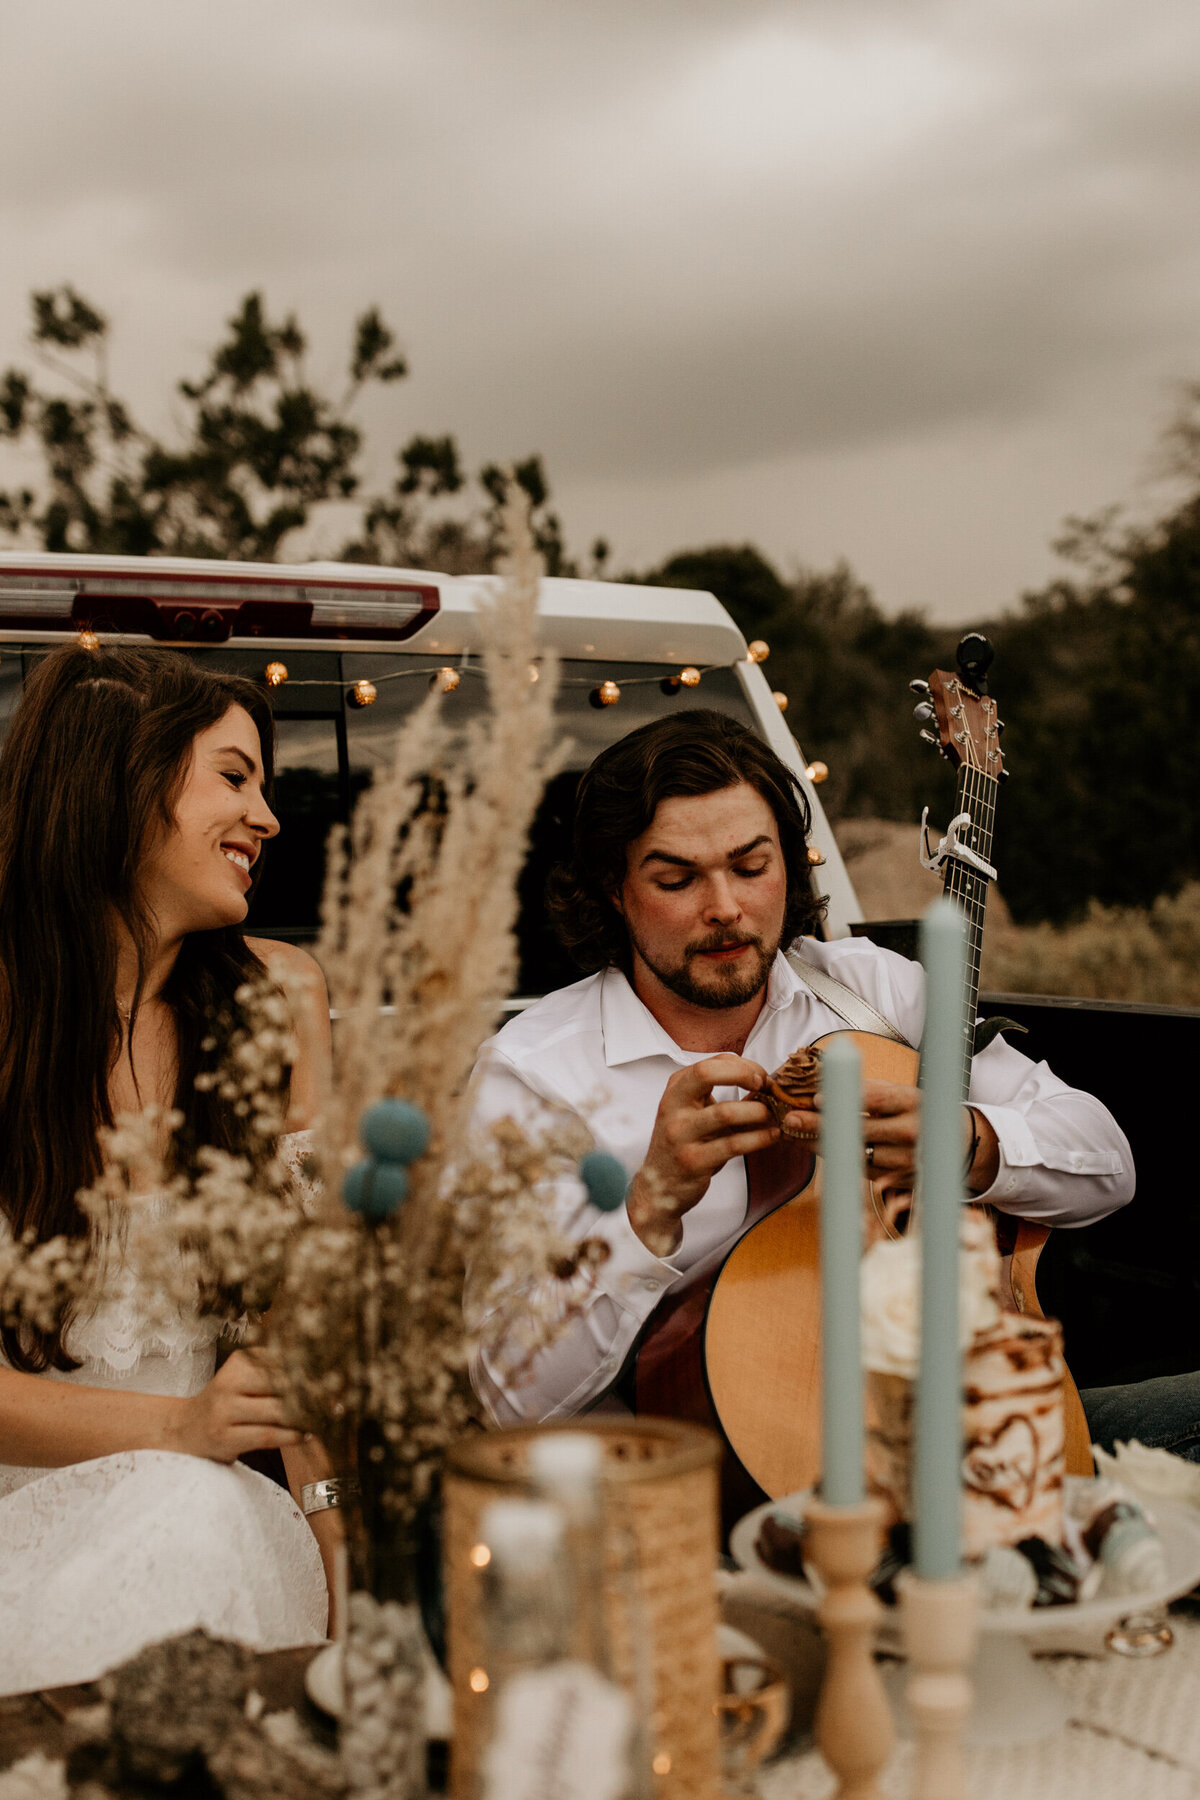 bride and groom eating cake in their truck bed picnic setup